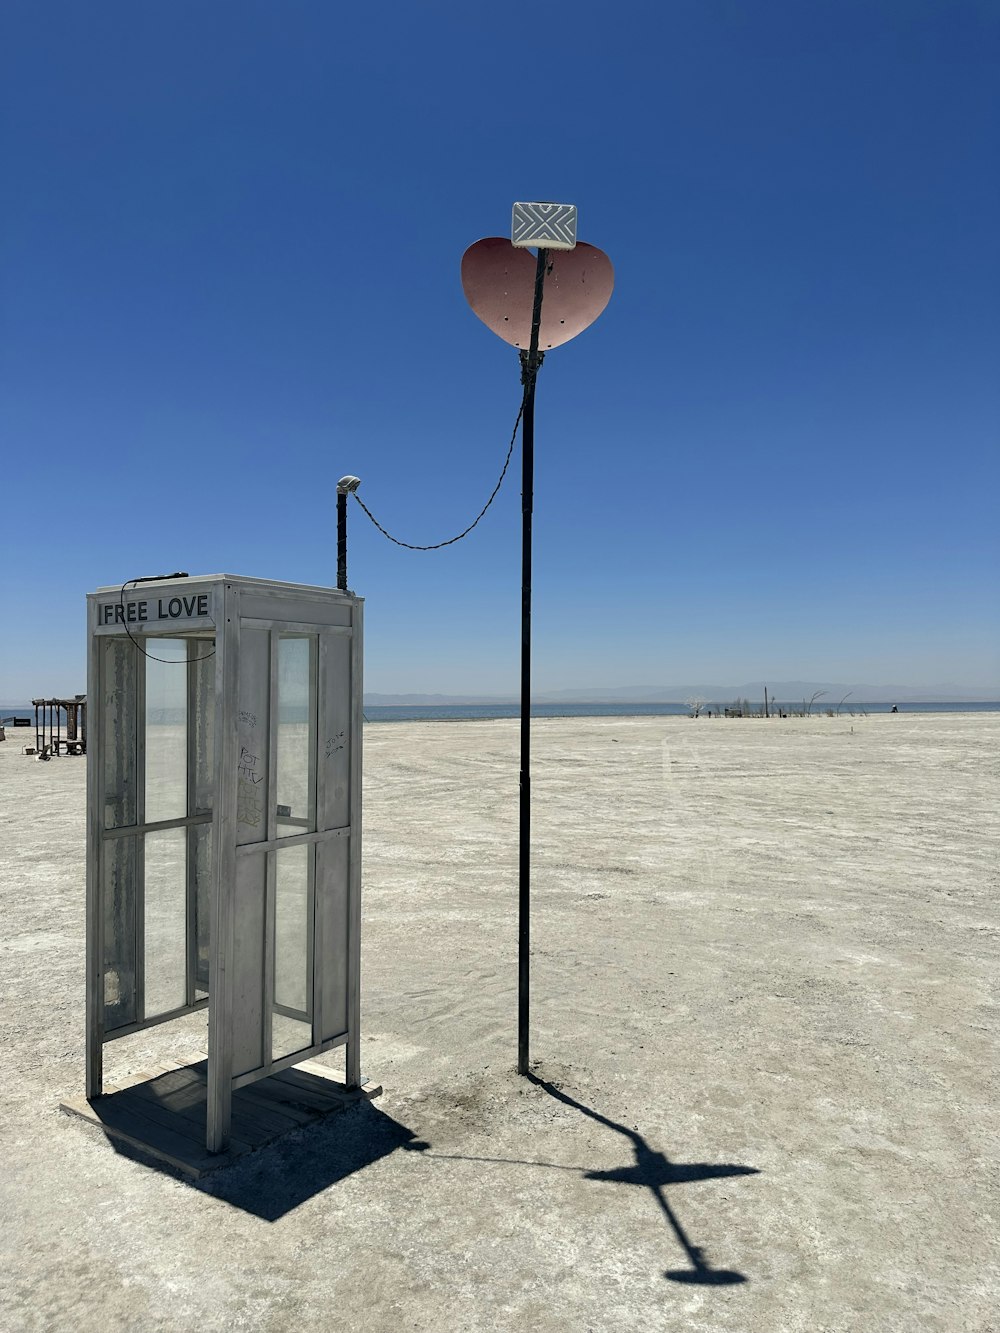 a phone booth sitting in the middle of a desert